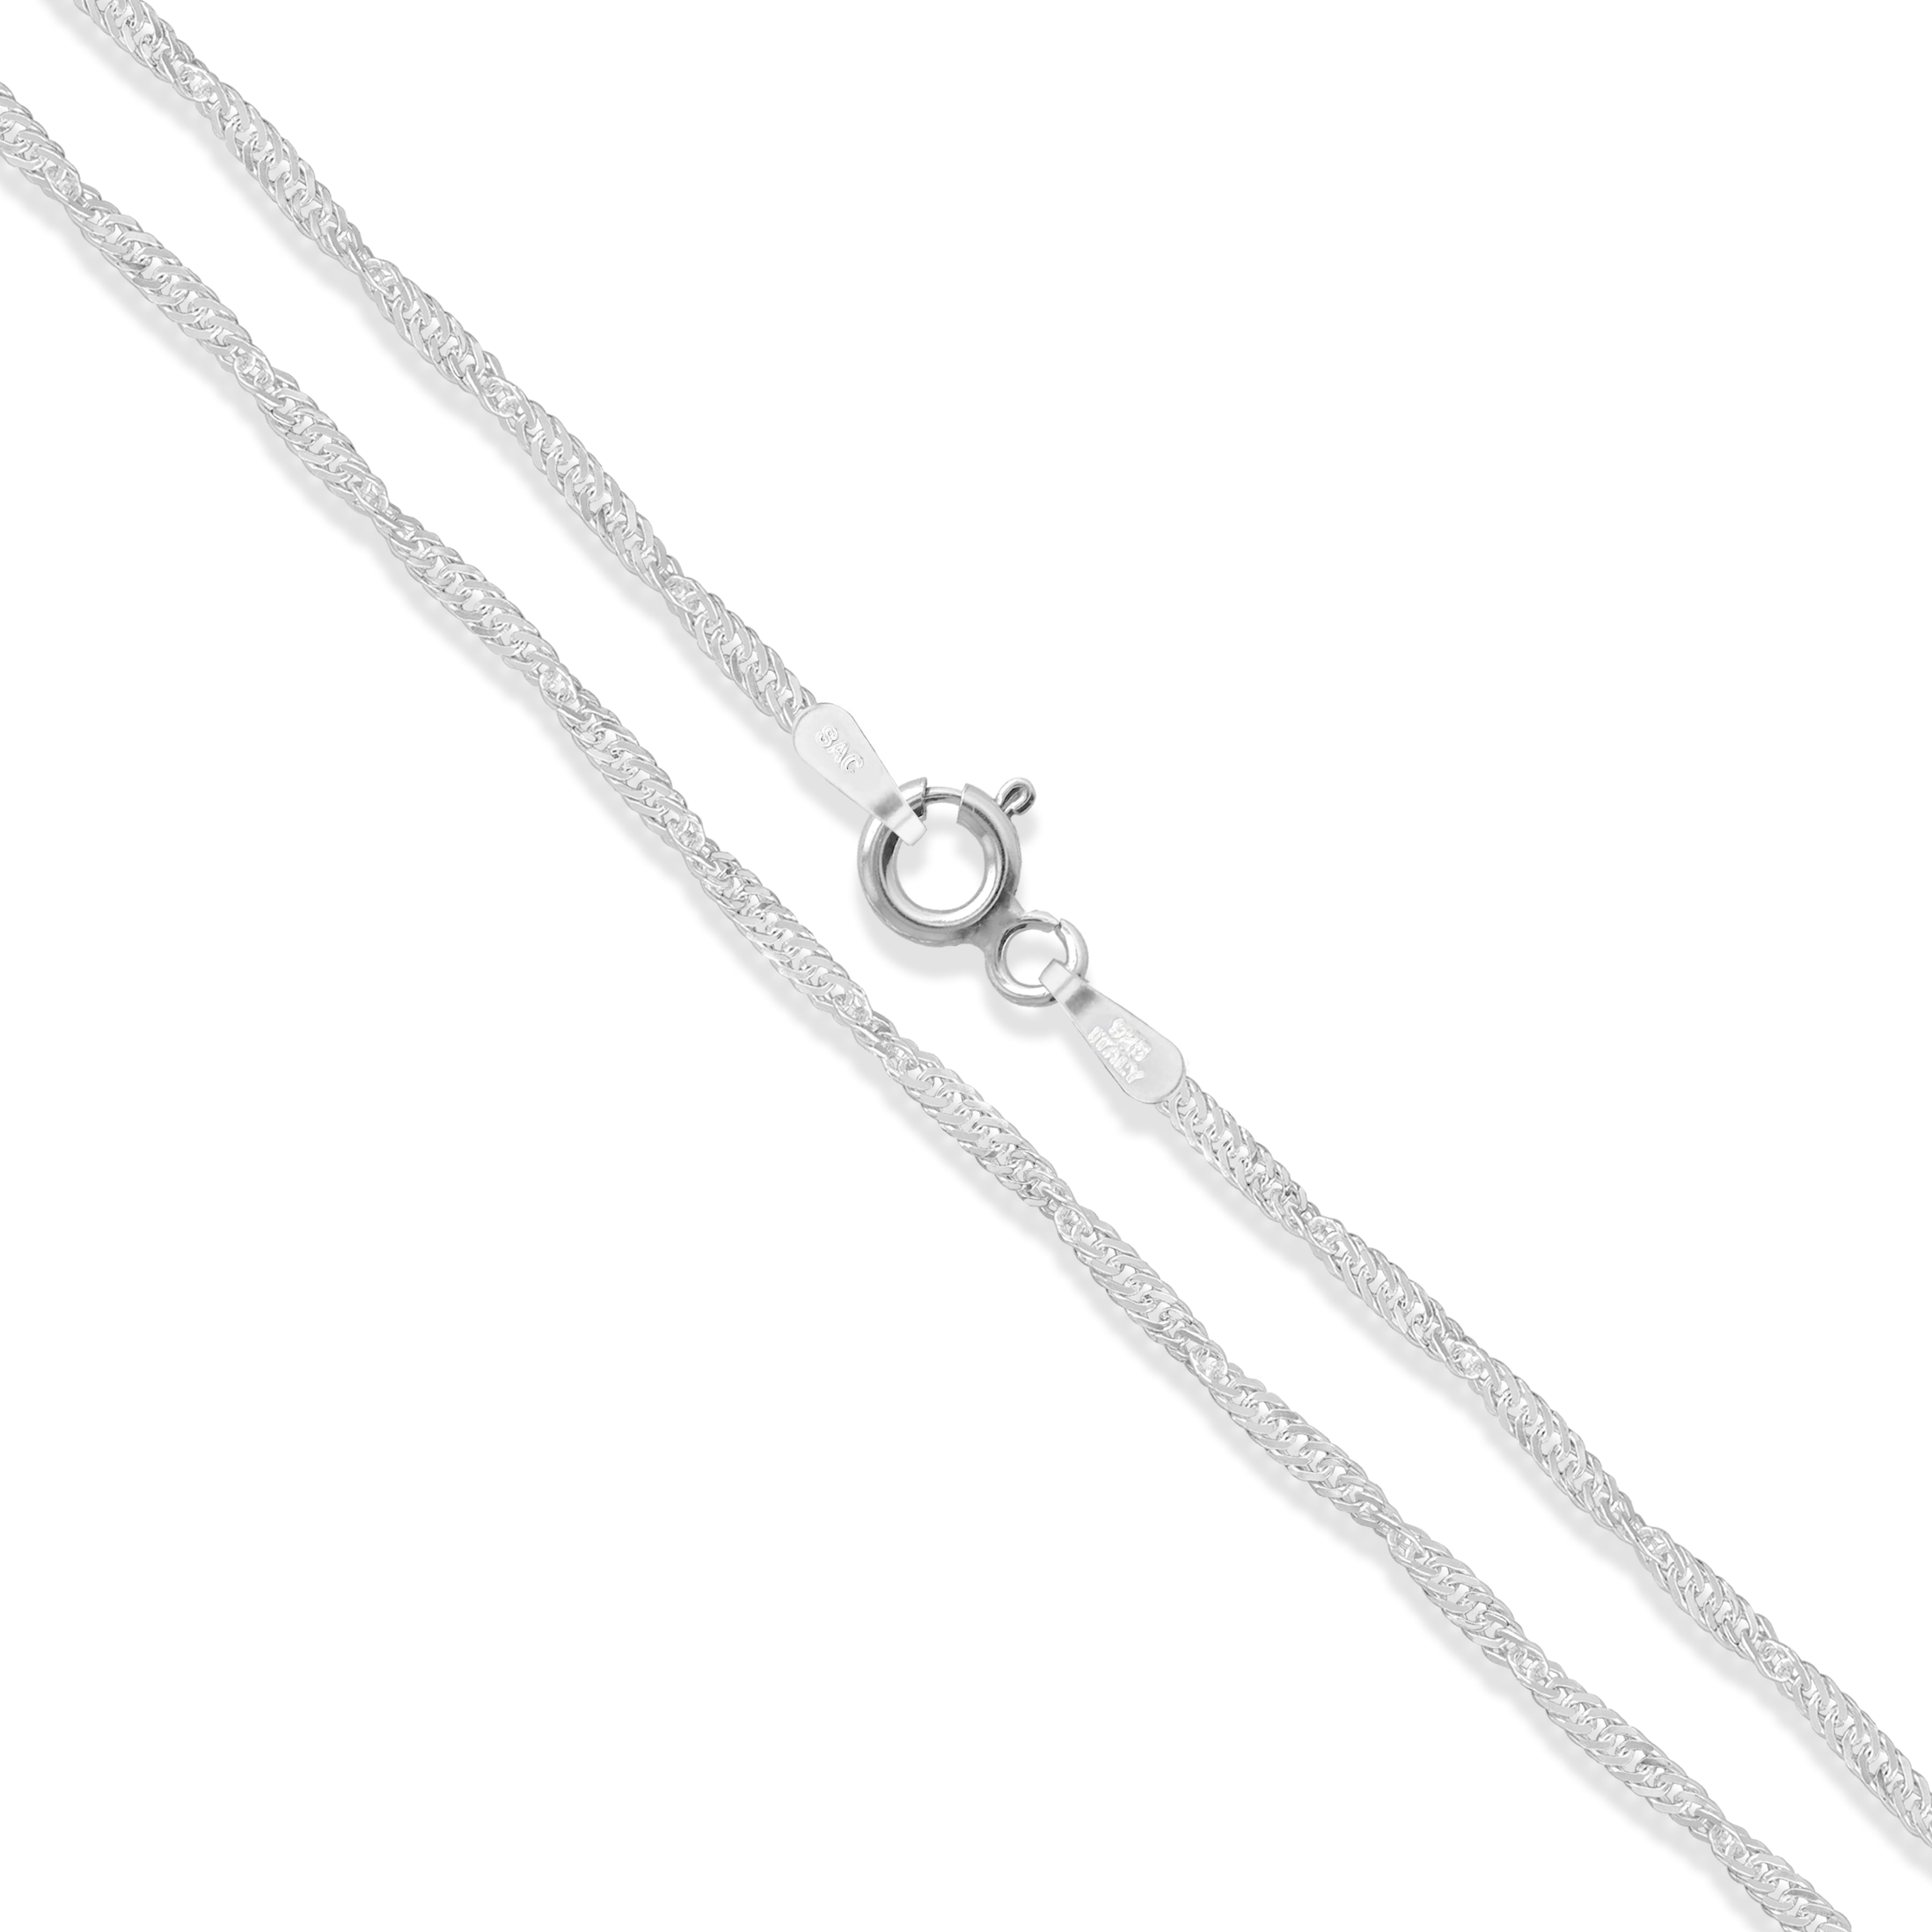 2.4mm 16" 30" Silver Stainless Steel Box Necklace Chain Unisex's Men Women 